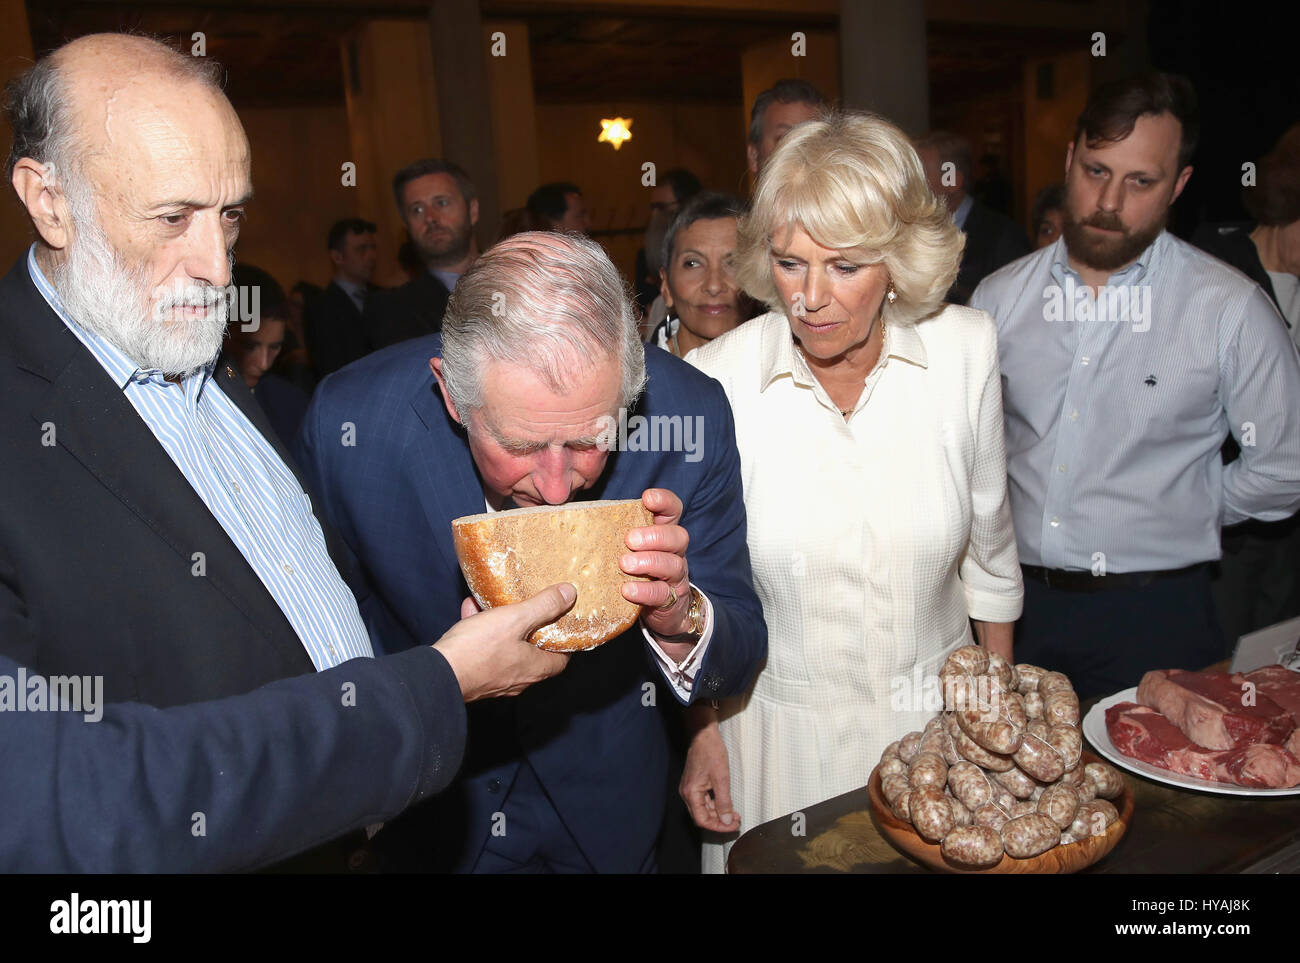 The Prince of Wales and the Duchess of Cornwall as they visit Sant'Ambrogio Market to celebrate the Slow Food movement and meet local food producers of the Abruzzo region and areas affected by the Italian earthquakes of 2016, on the sixth day of his nine-day European tour. Stock Photo